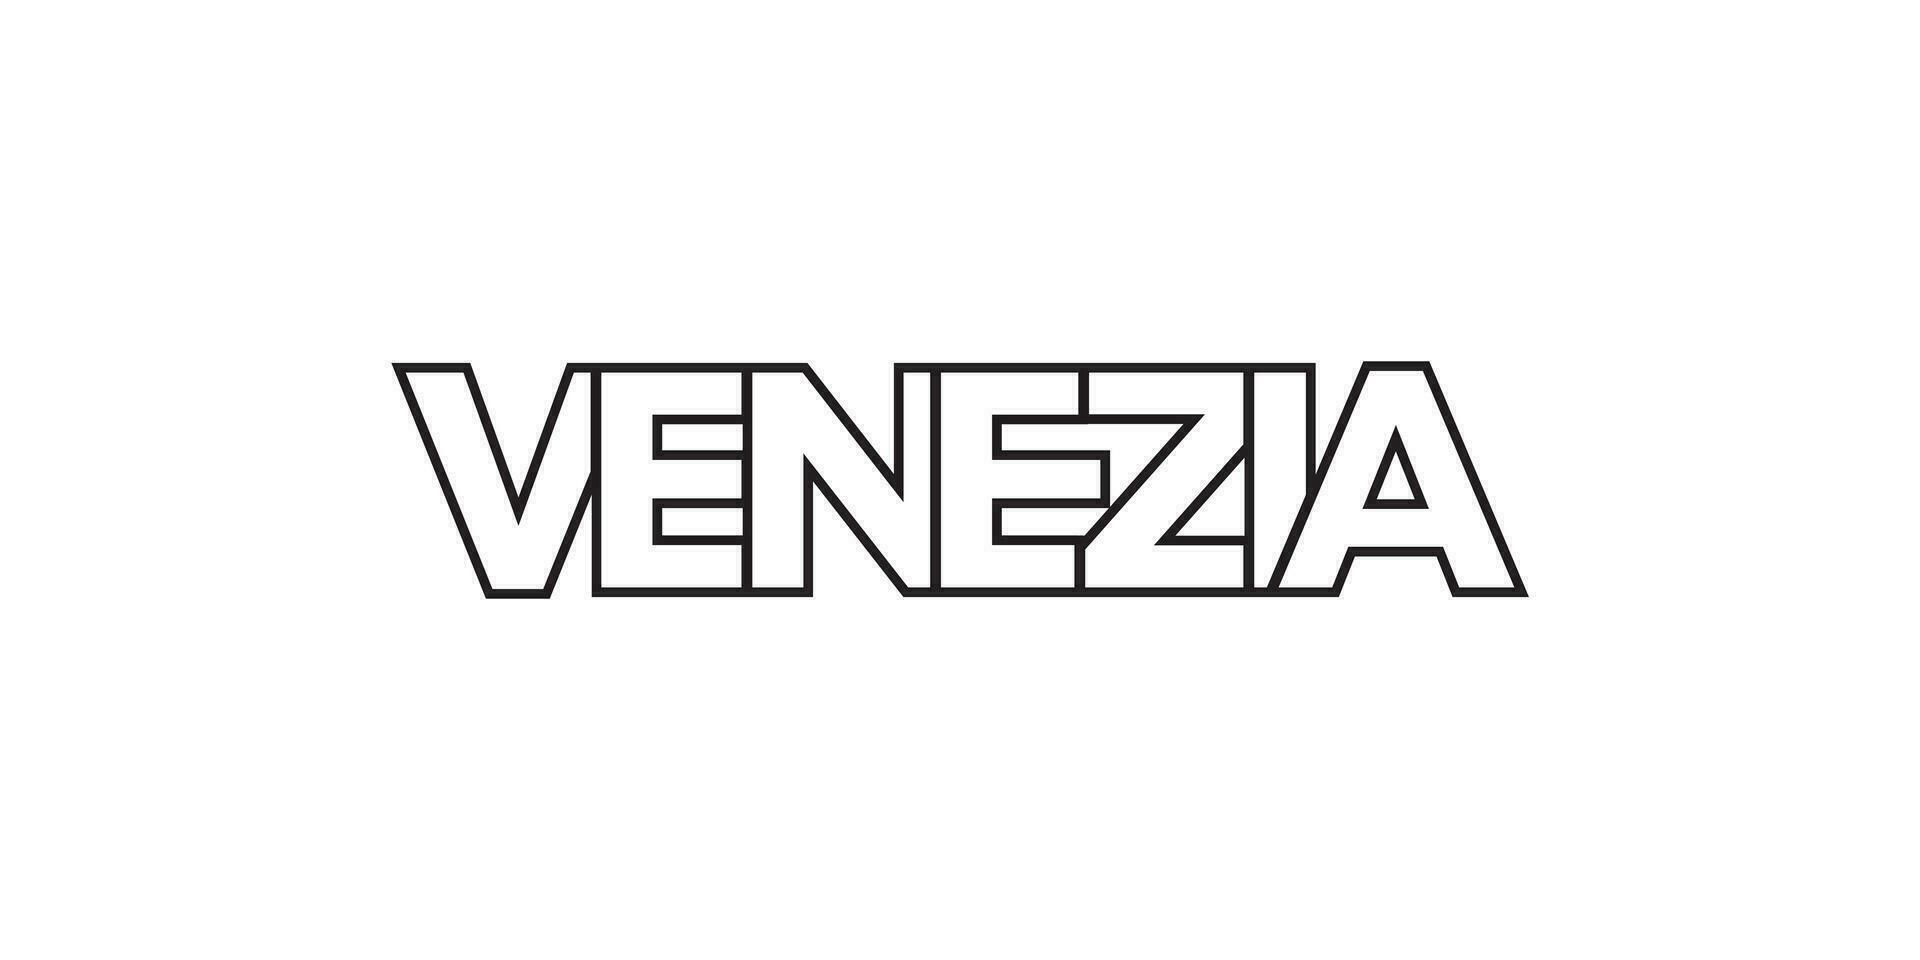 Venezia in the Italia emblem. The design features a geometric style, vector illustration with bold typography in a modern font. The graphic slogan lettering.